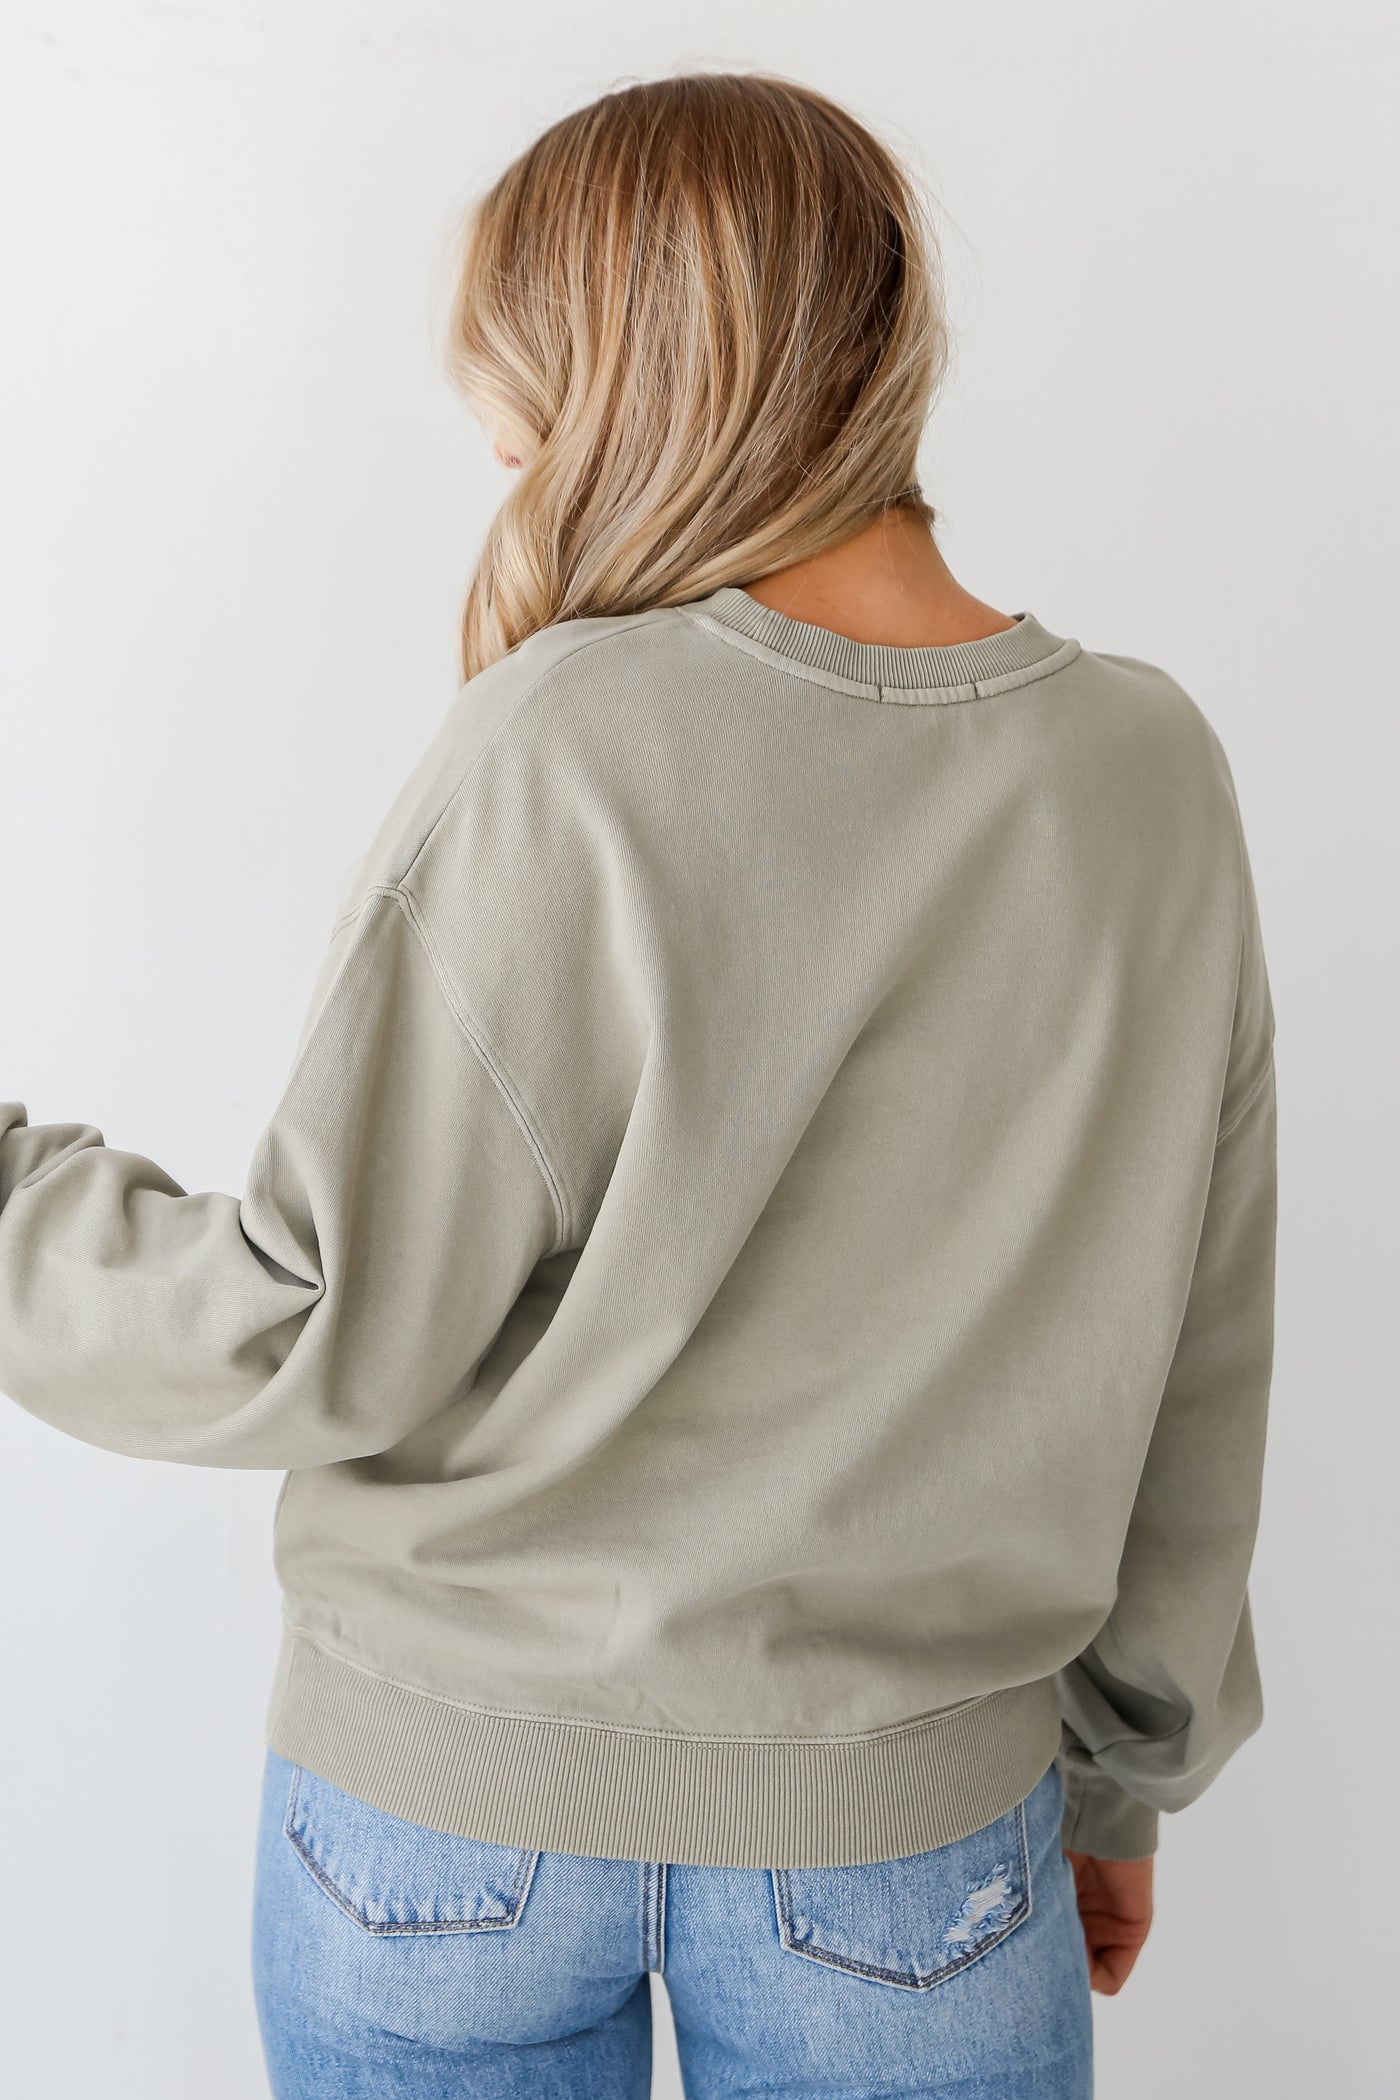 sage Oversized Pullover back view